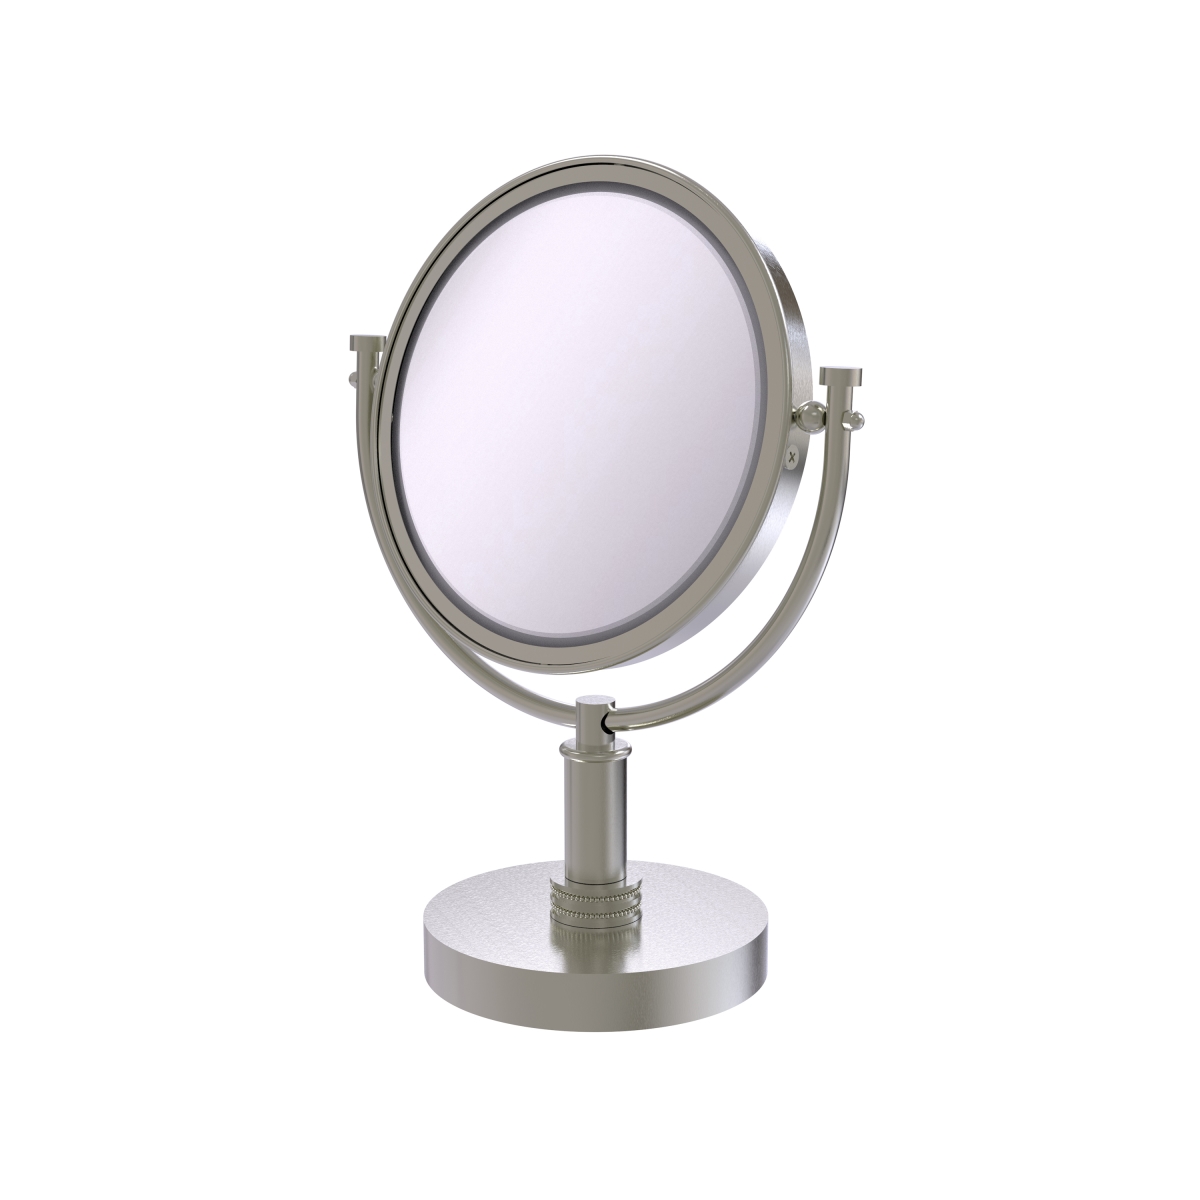 Picture of Allied Brass DM-4D-4X-SN 8 in. Vanity Top Make-Up Mirror 4X Magnification, Satin Nickel - 15 x 8 x 8 in.